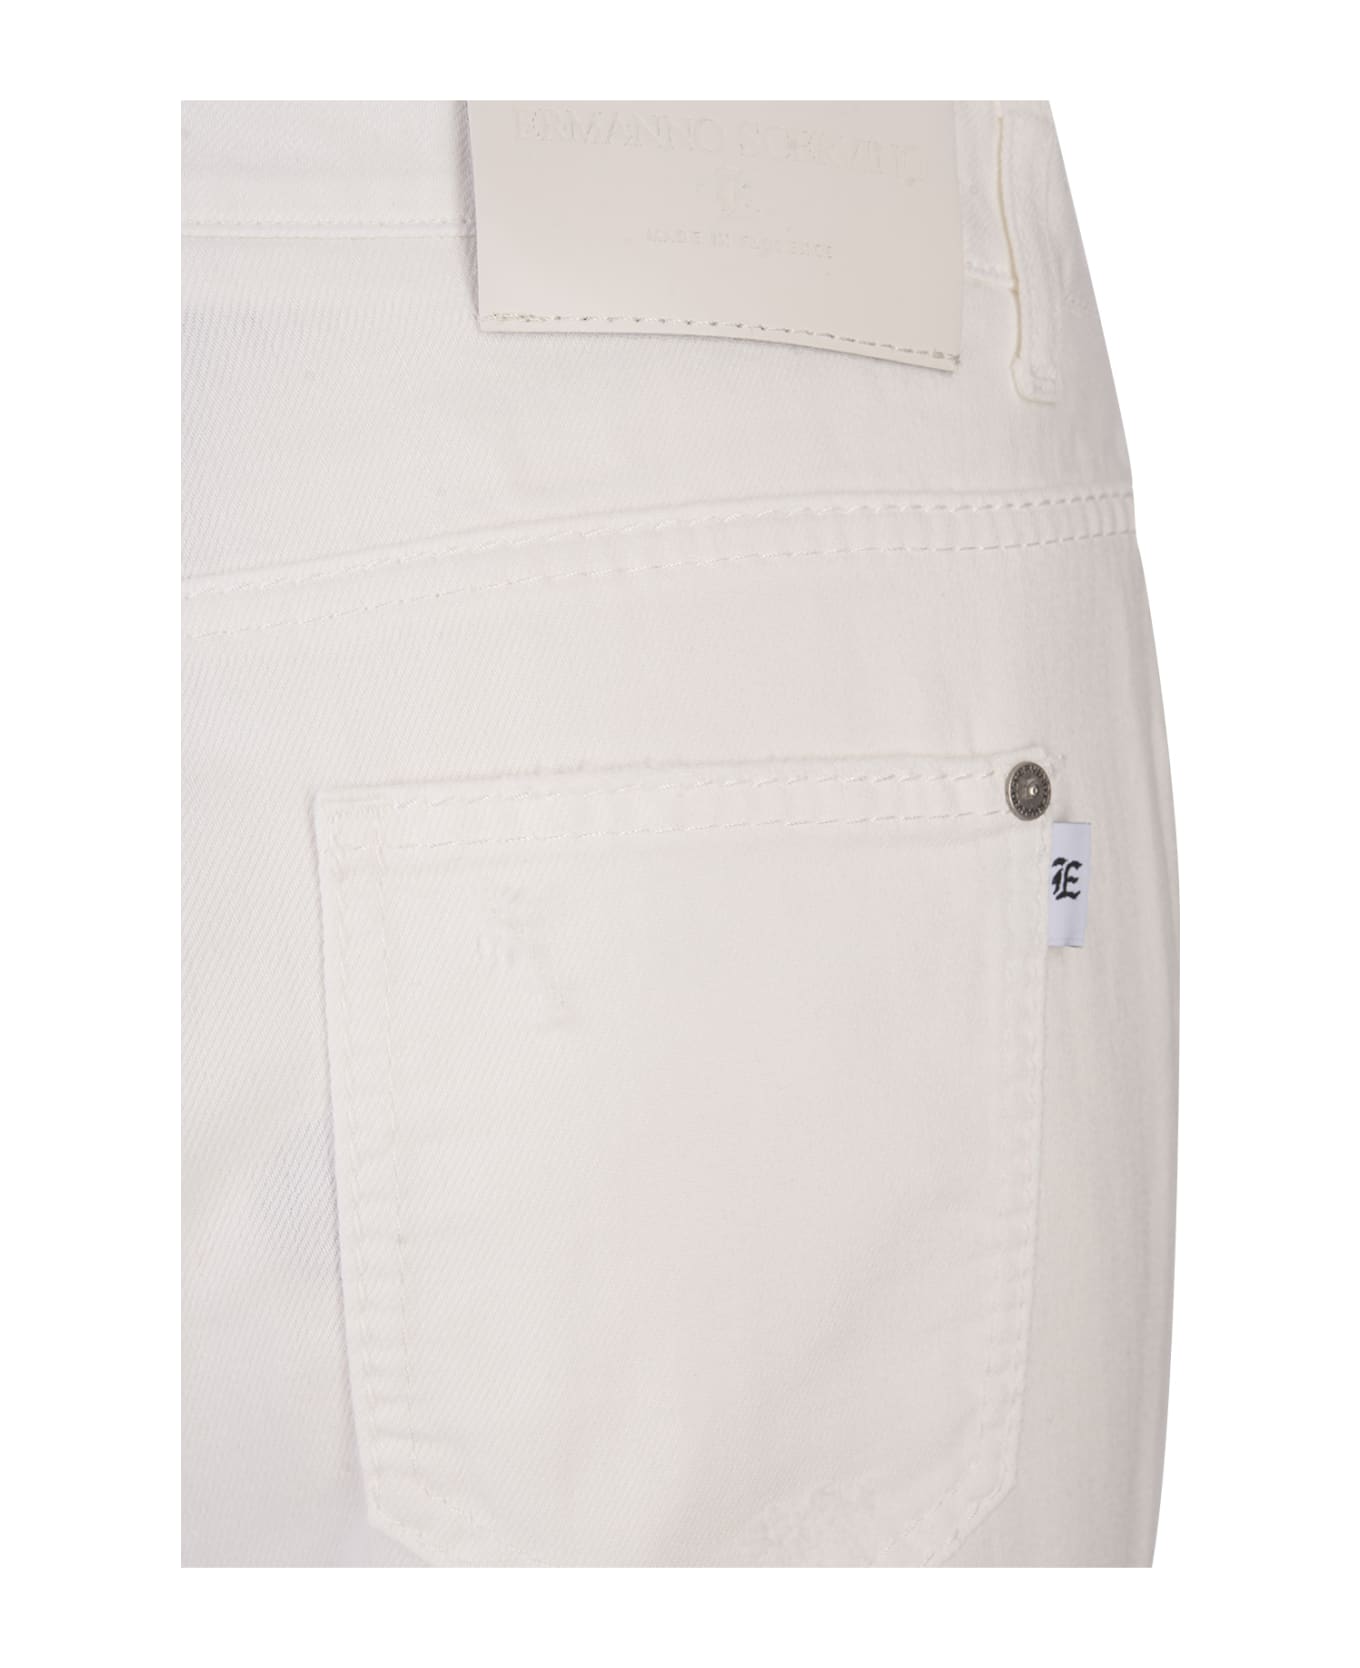 Ermanno Scervino White Bootcut Jeans With Sangallo Lace Cut-outs - White